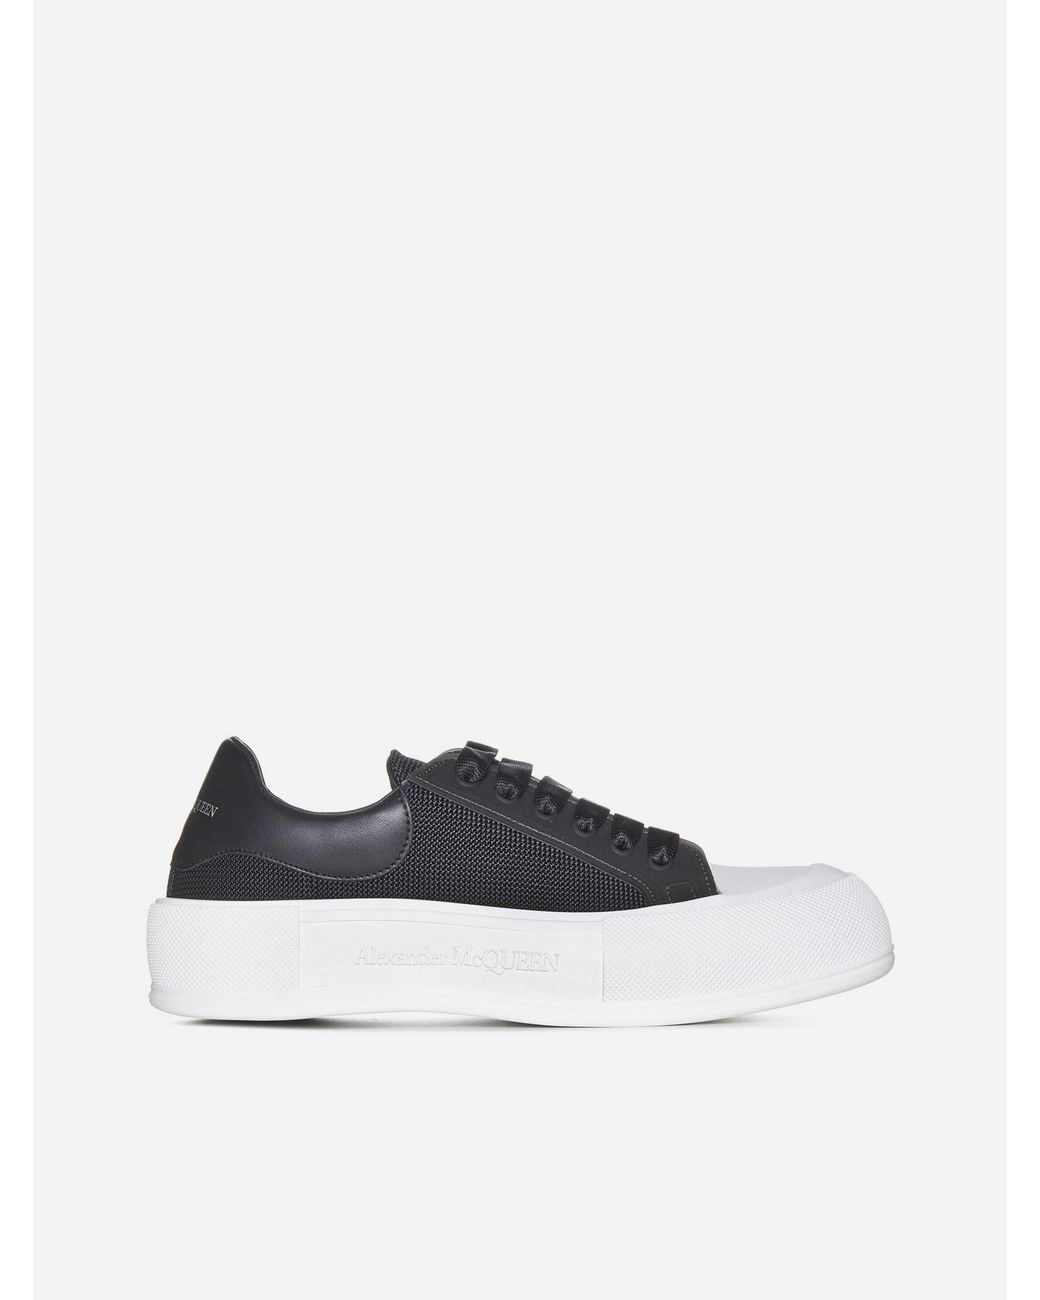 Alexander McQueen Plimsoll Mesh And Leather Sneakers in White for Men ...